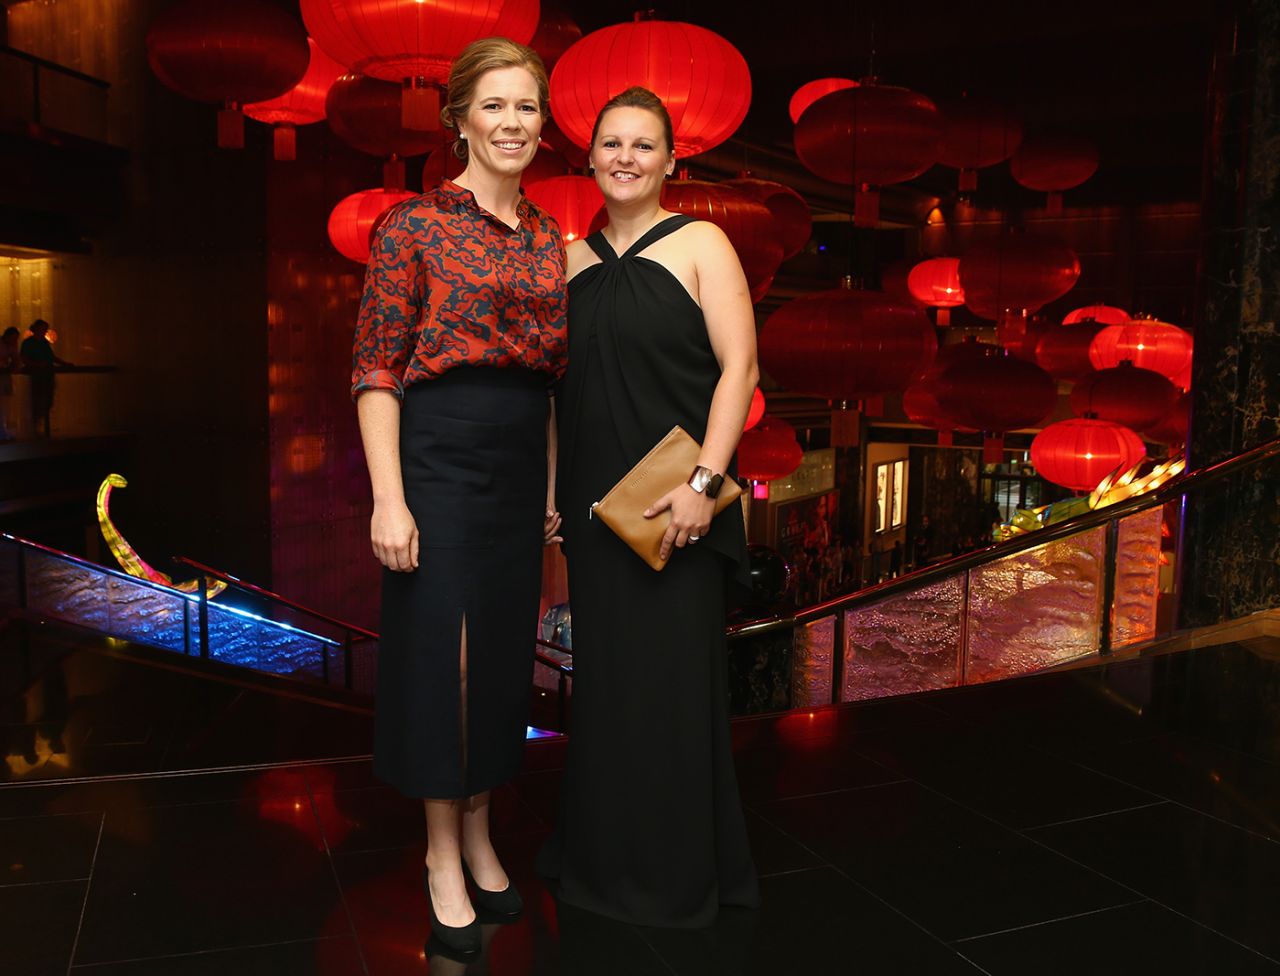 Alex Blackwell with her wife Lynsey Askew at the Allan Border medal night, Melbourne, January 27, 2016